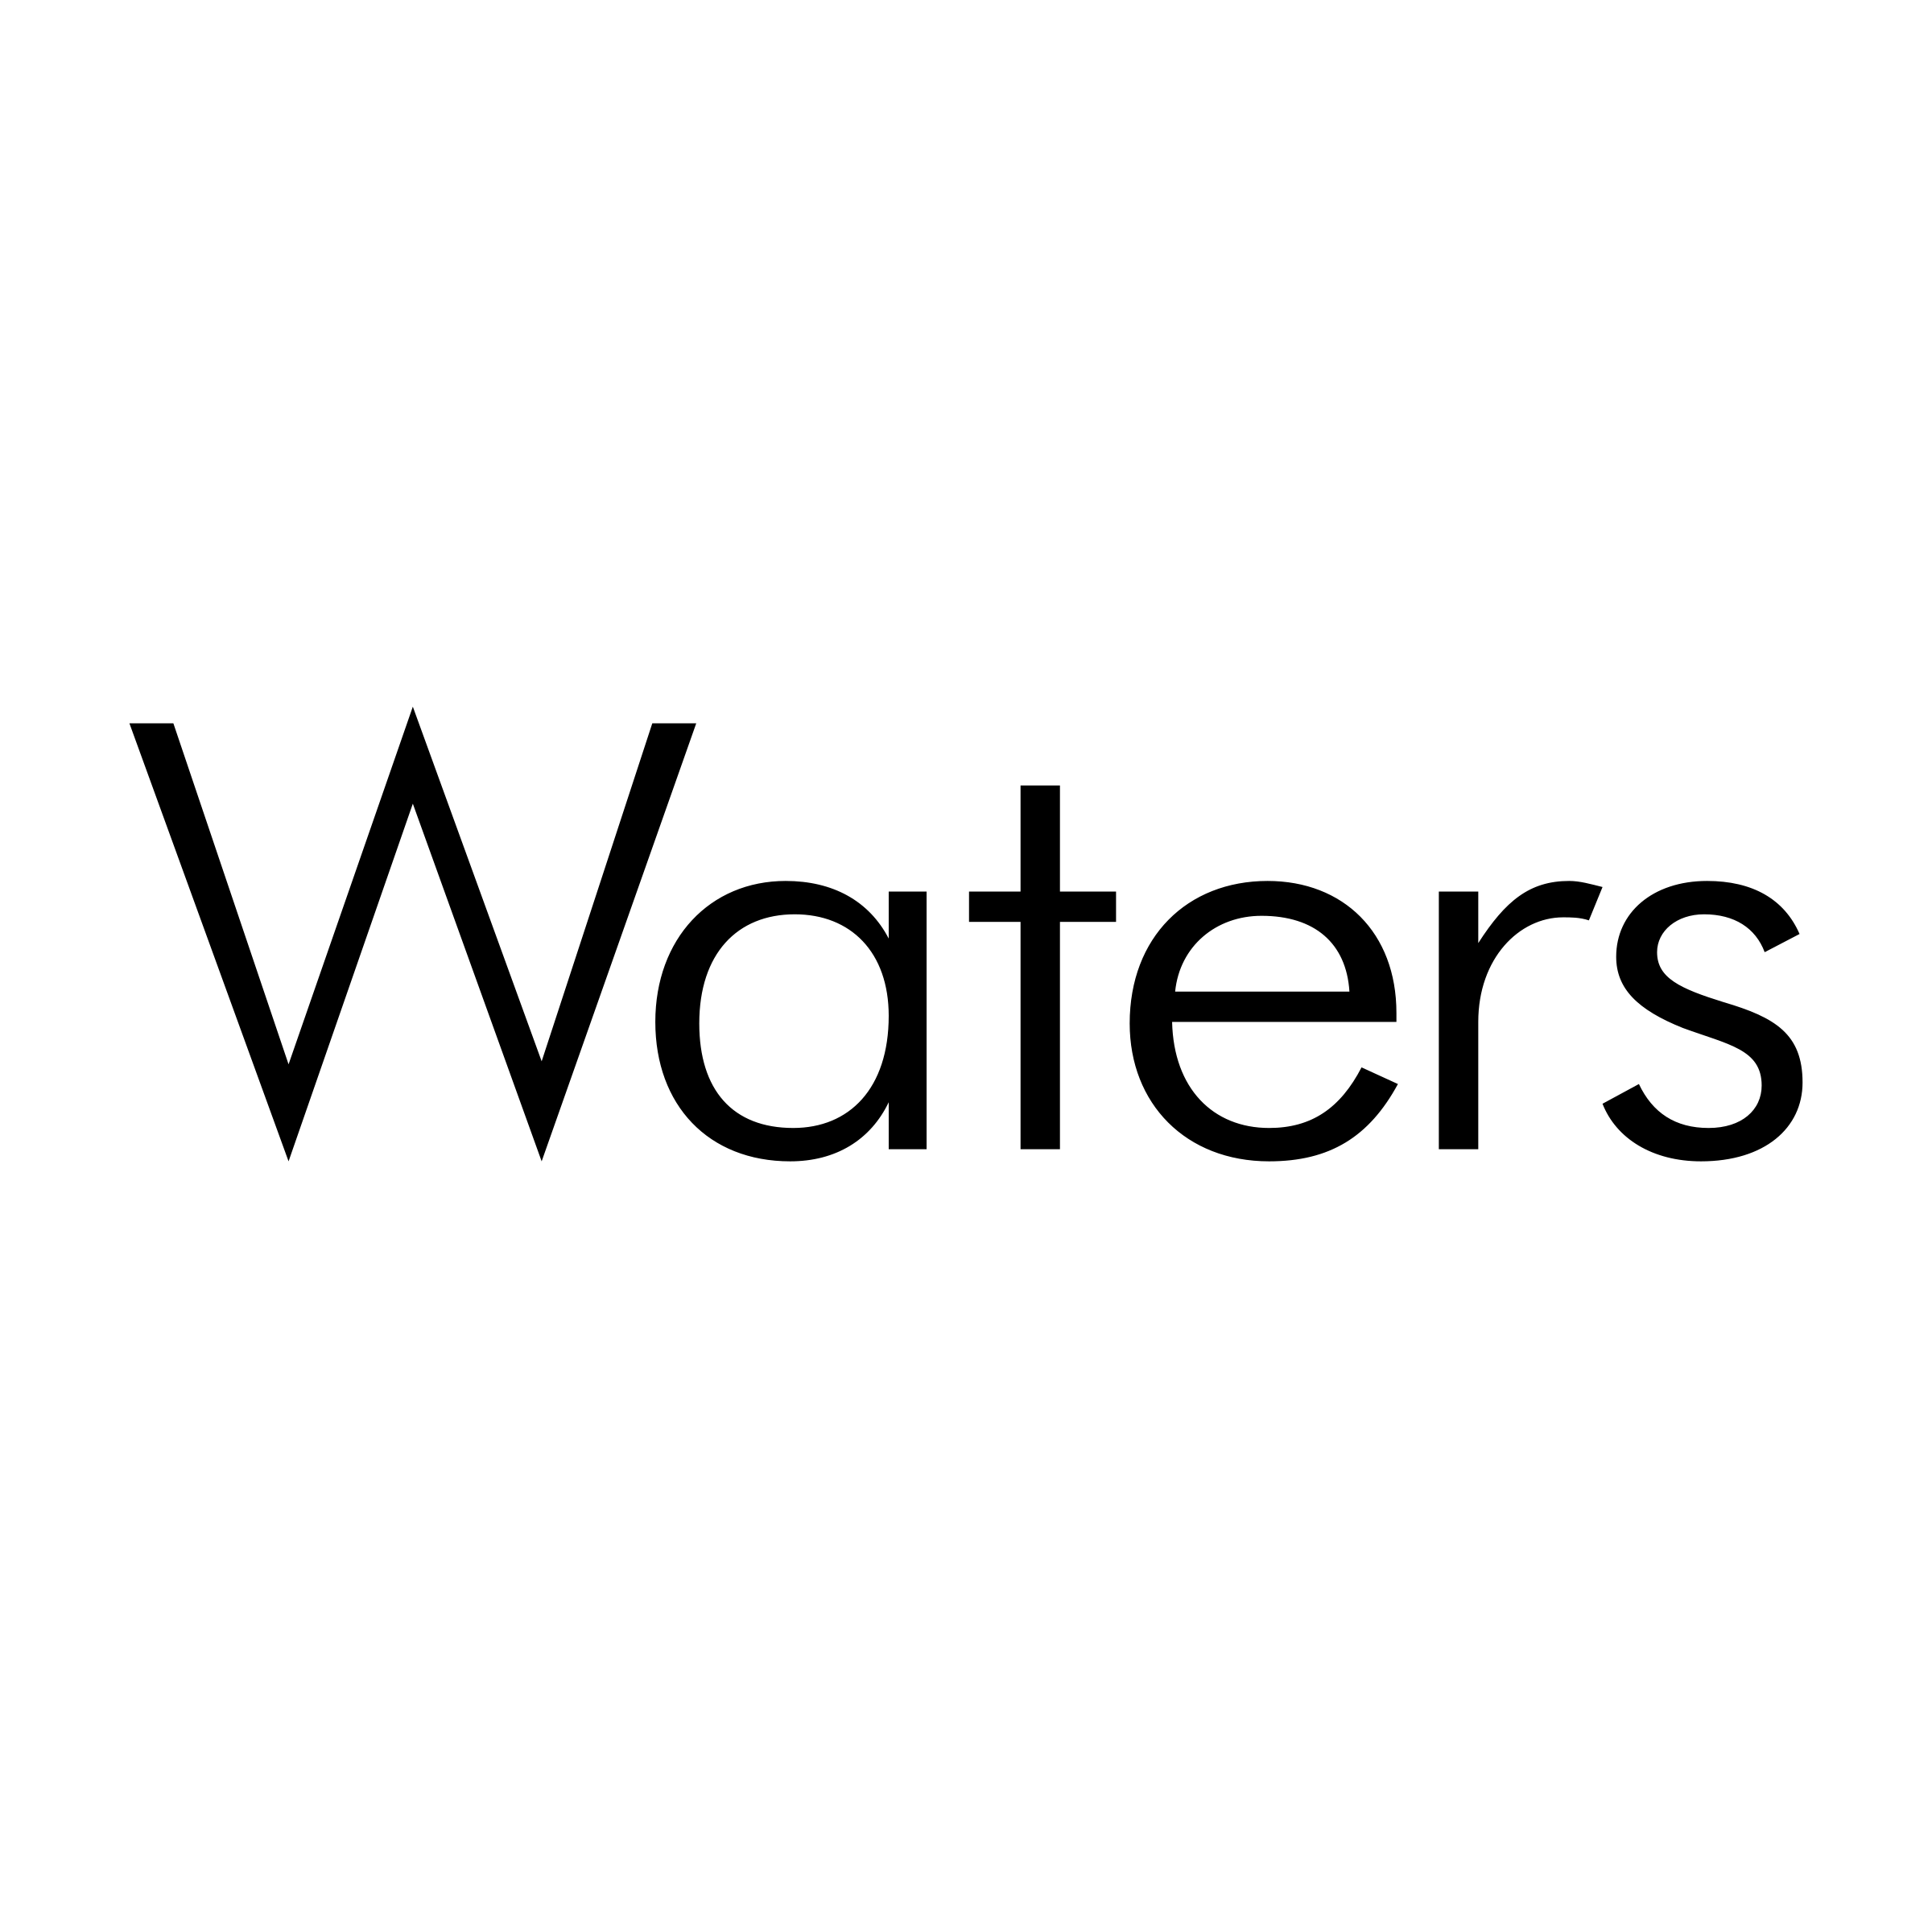 Waters Logo - Waters Logo PNG Transparent & SVG Vector